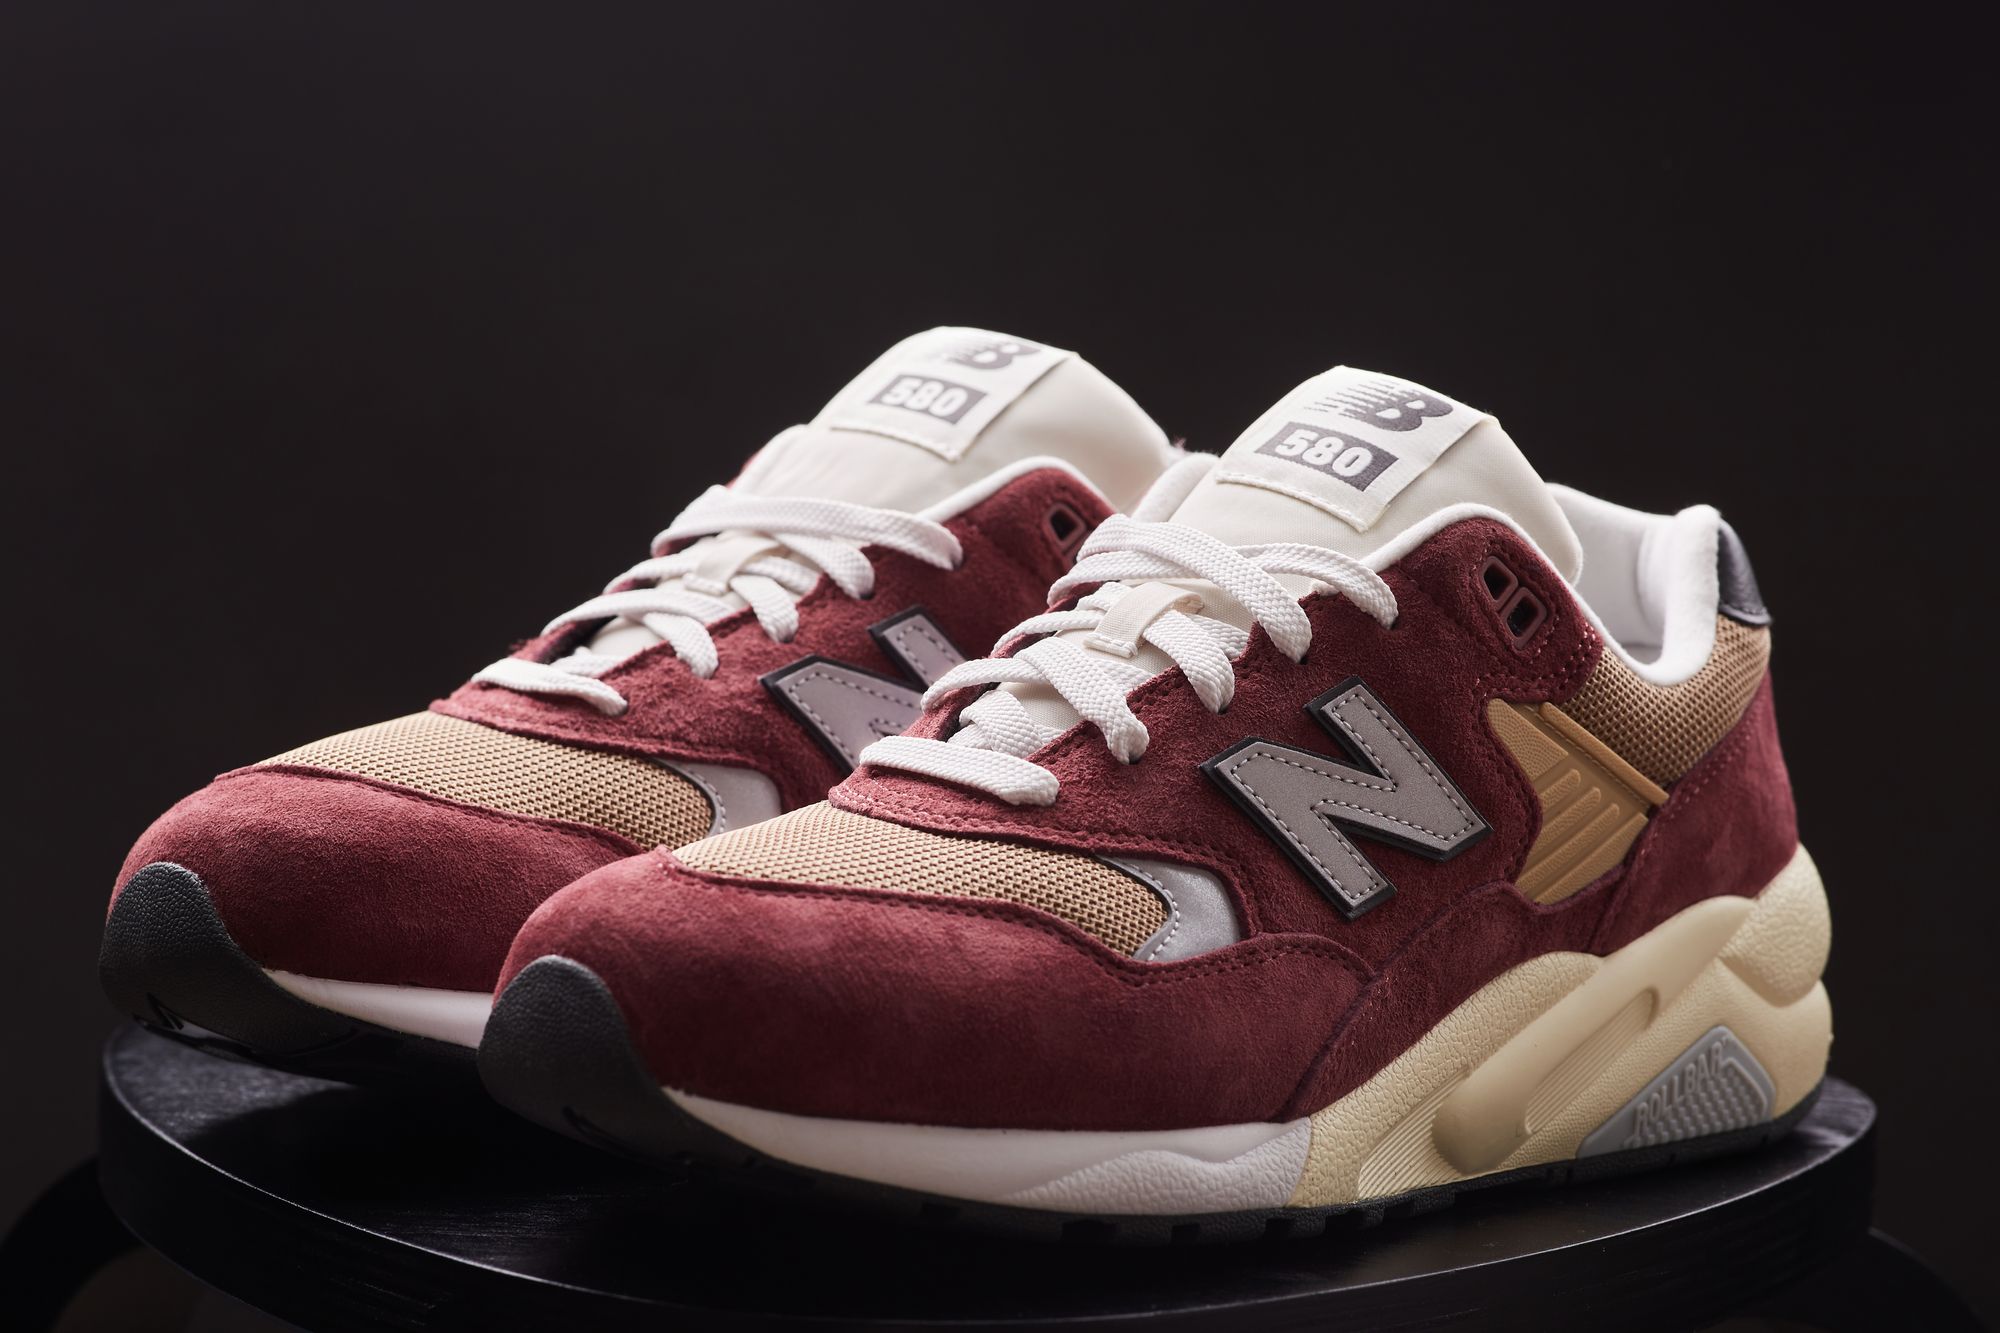 A Review Of The New Balance 580 Sneakers